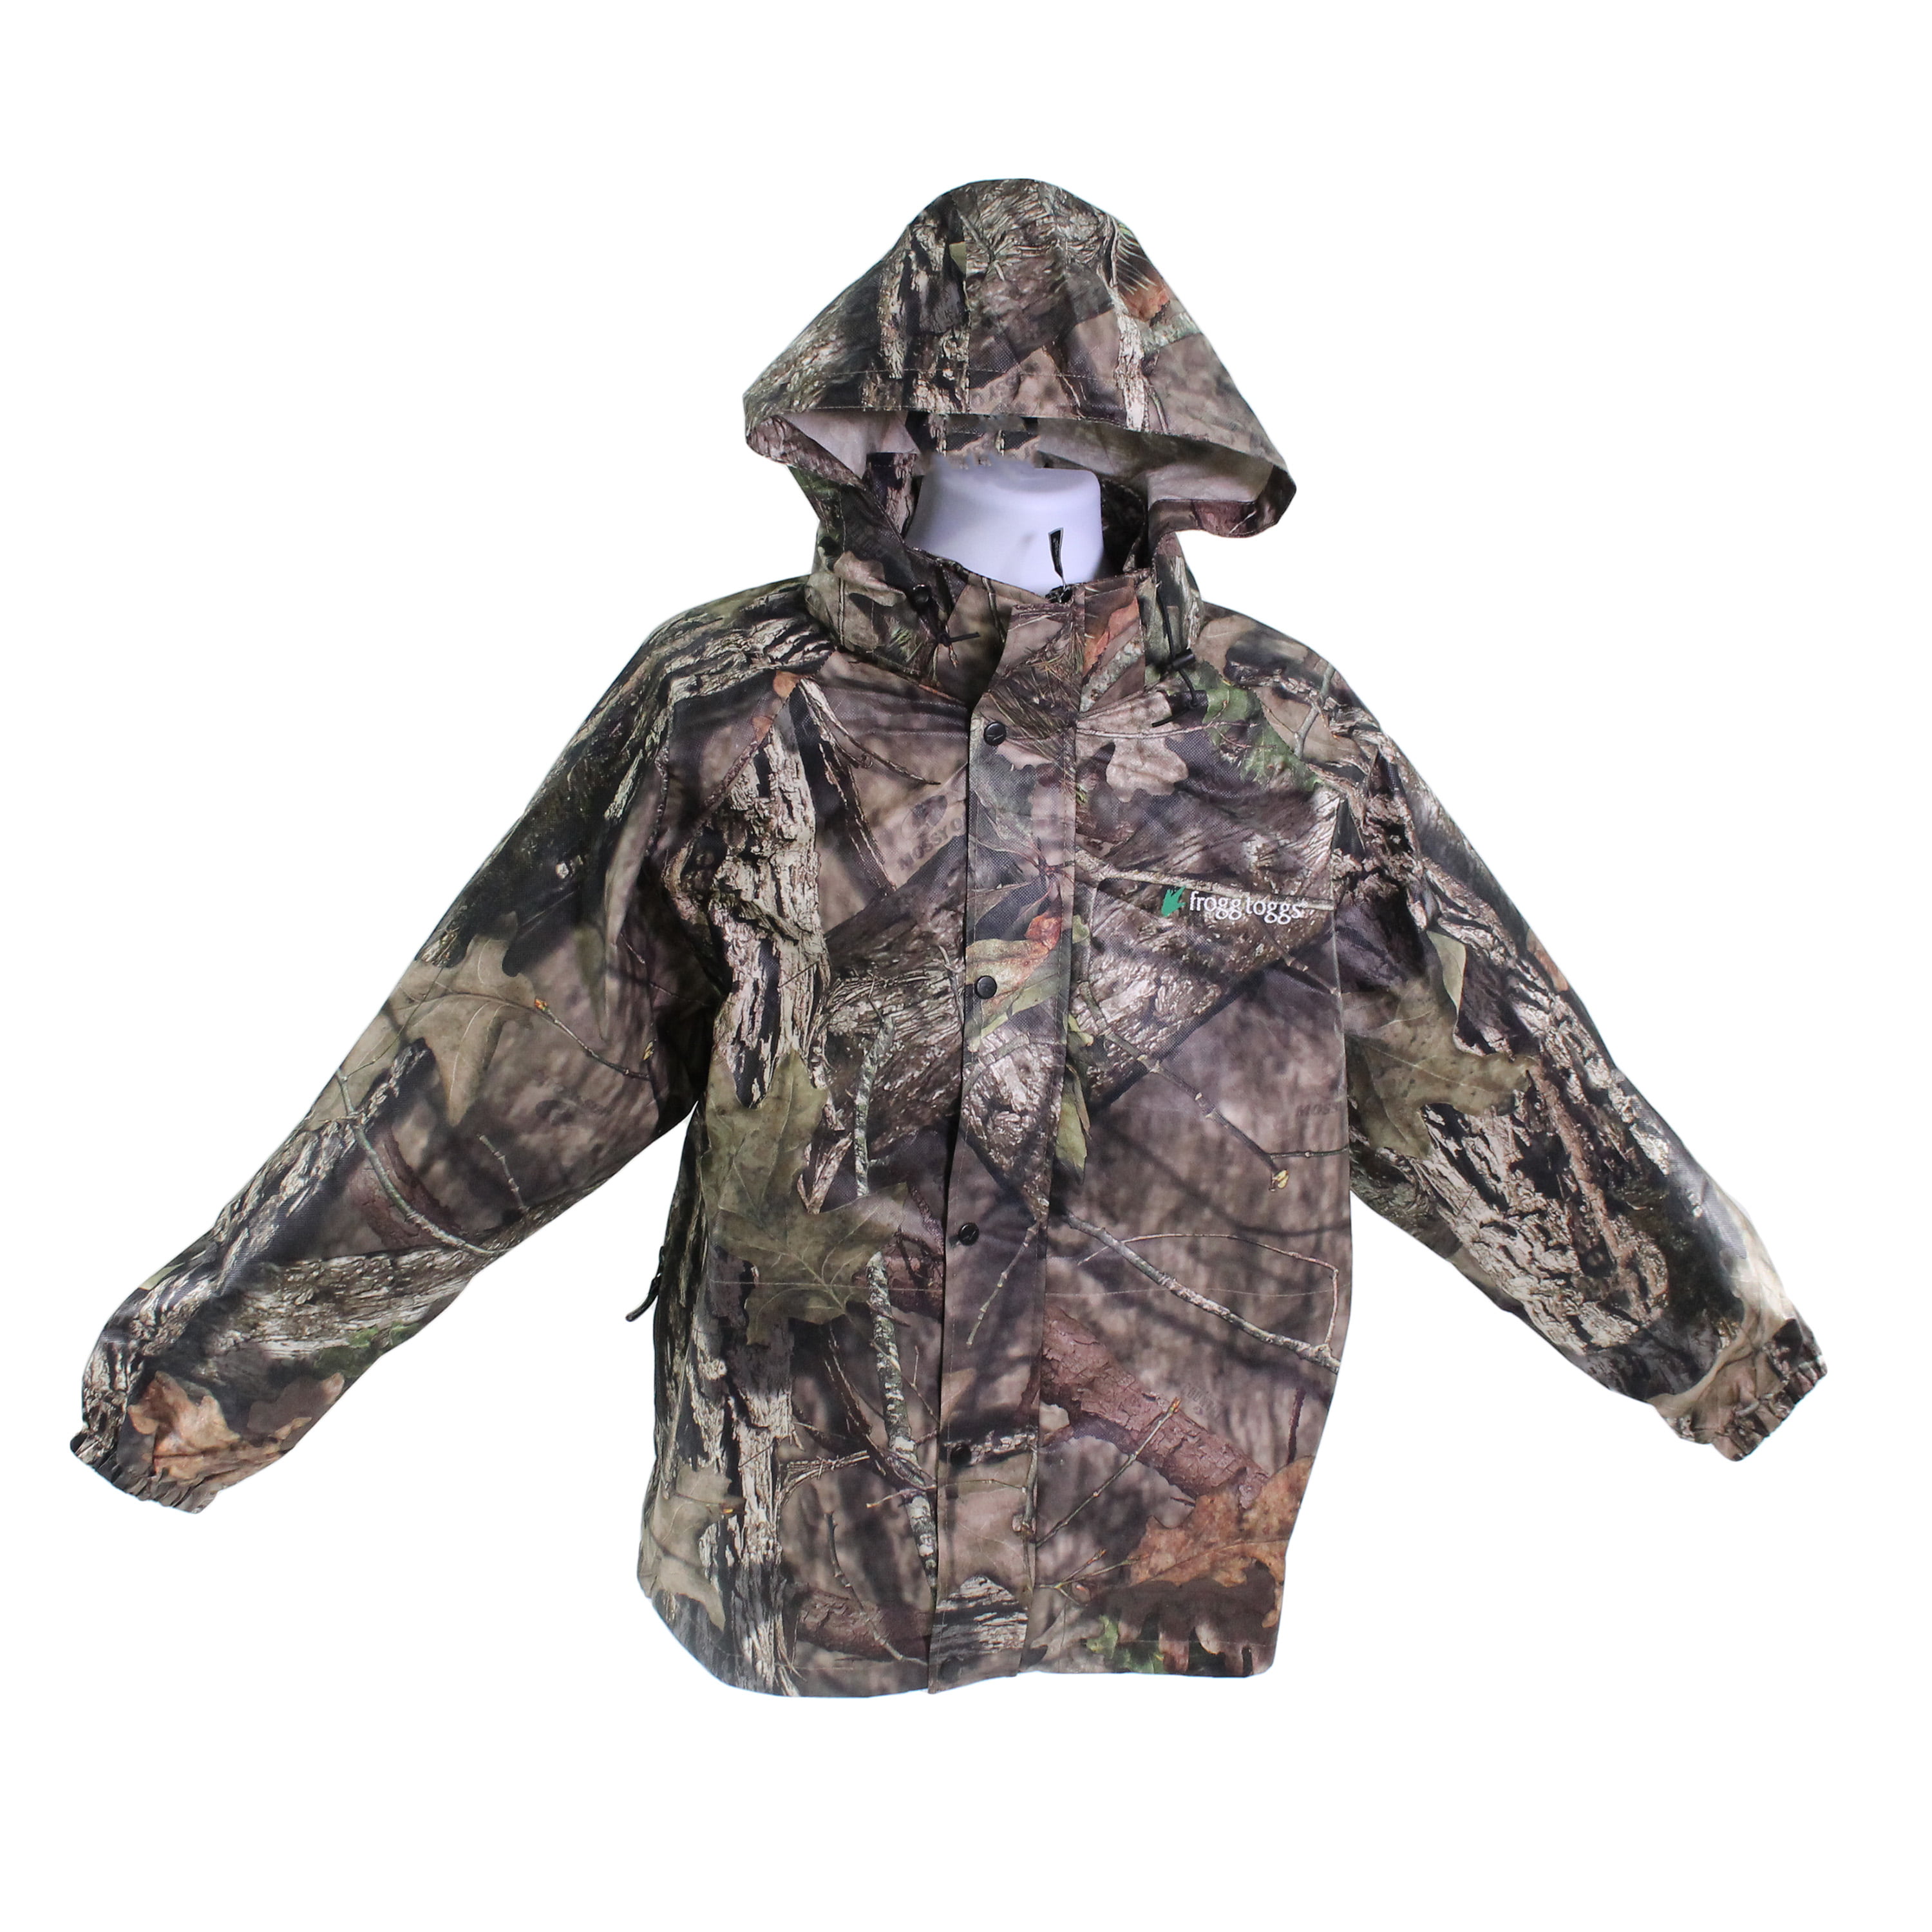 Frogg Toggs Pro Action Jacket - Mossy Oak Break-Up Country, Large ...